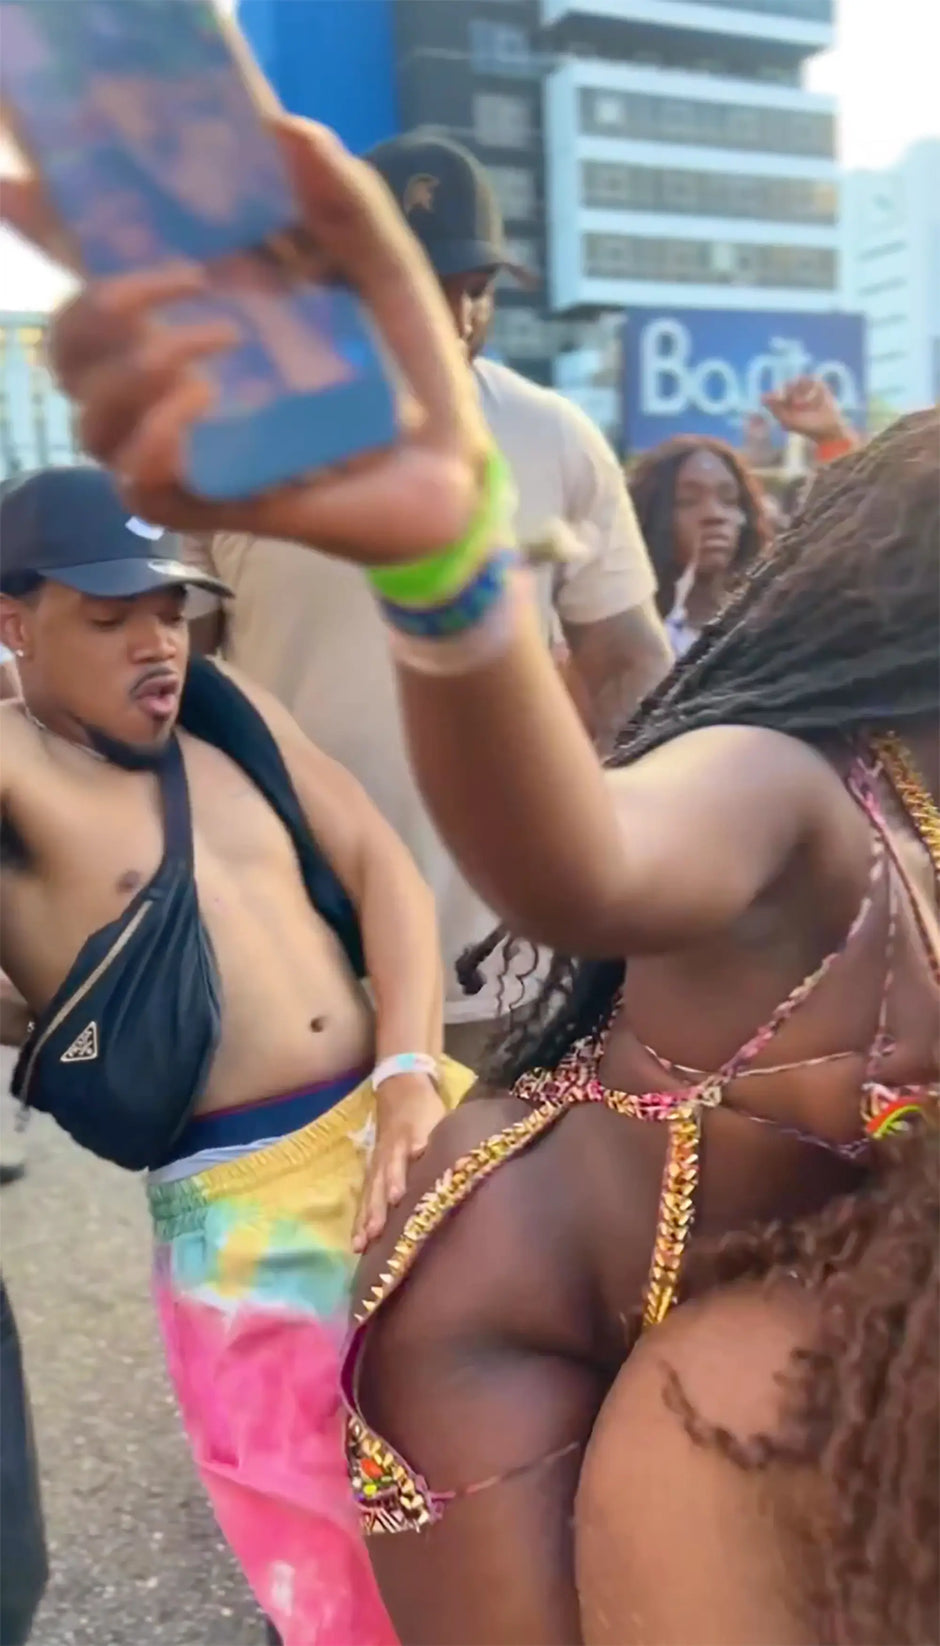 Chance the Rapper, who is married, was seen getting his groove on with another woman in Jamaica, with some calling the dance moves "inappropriate."